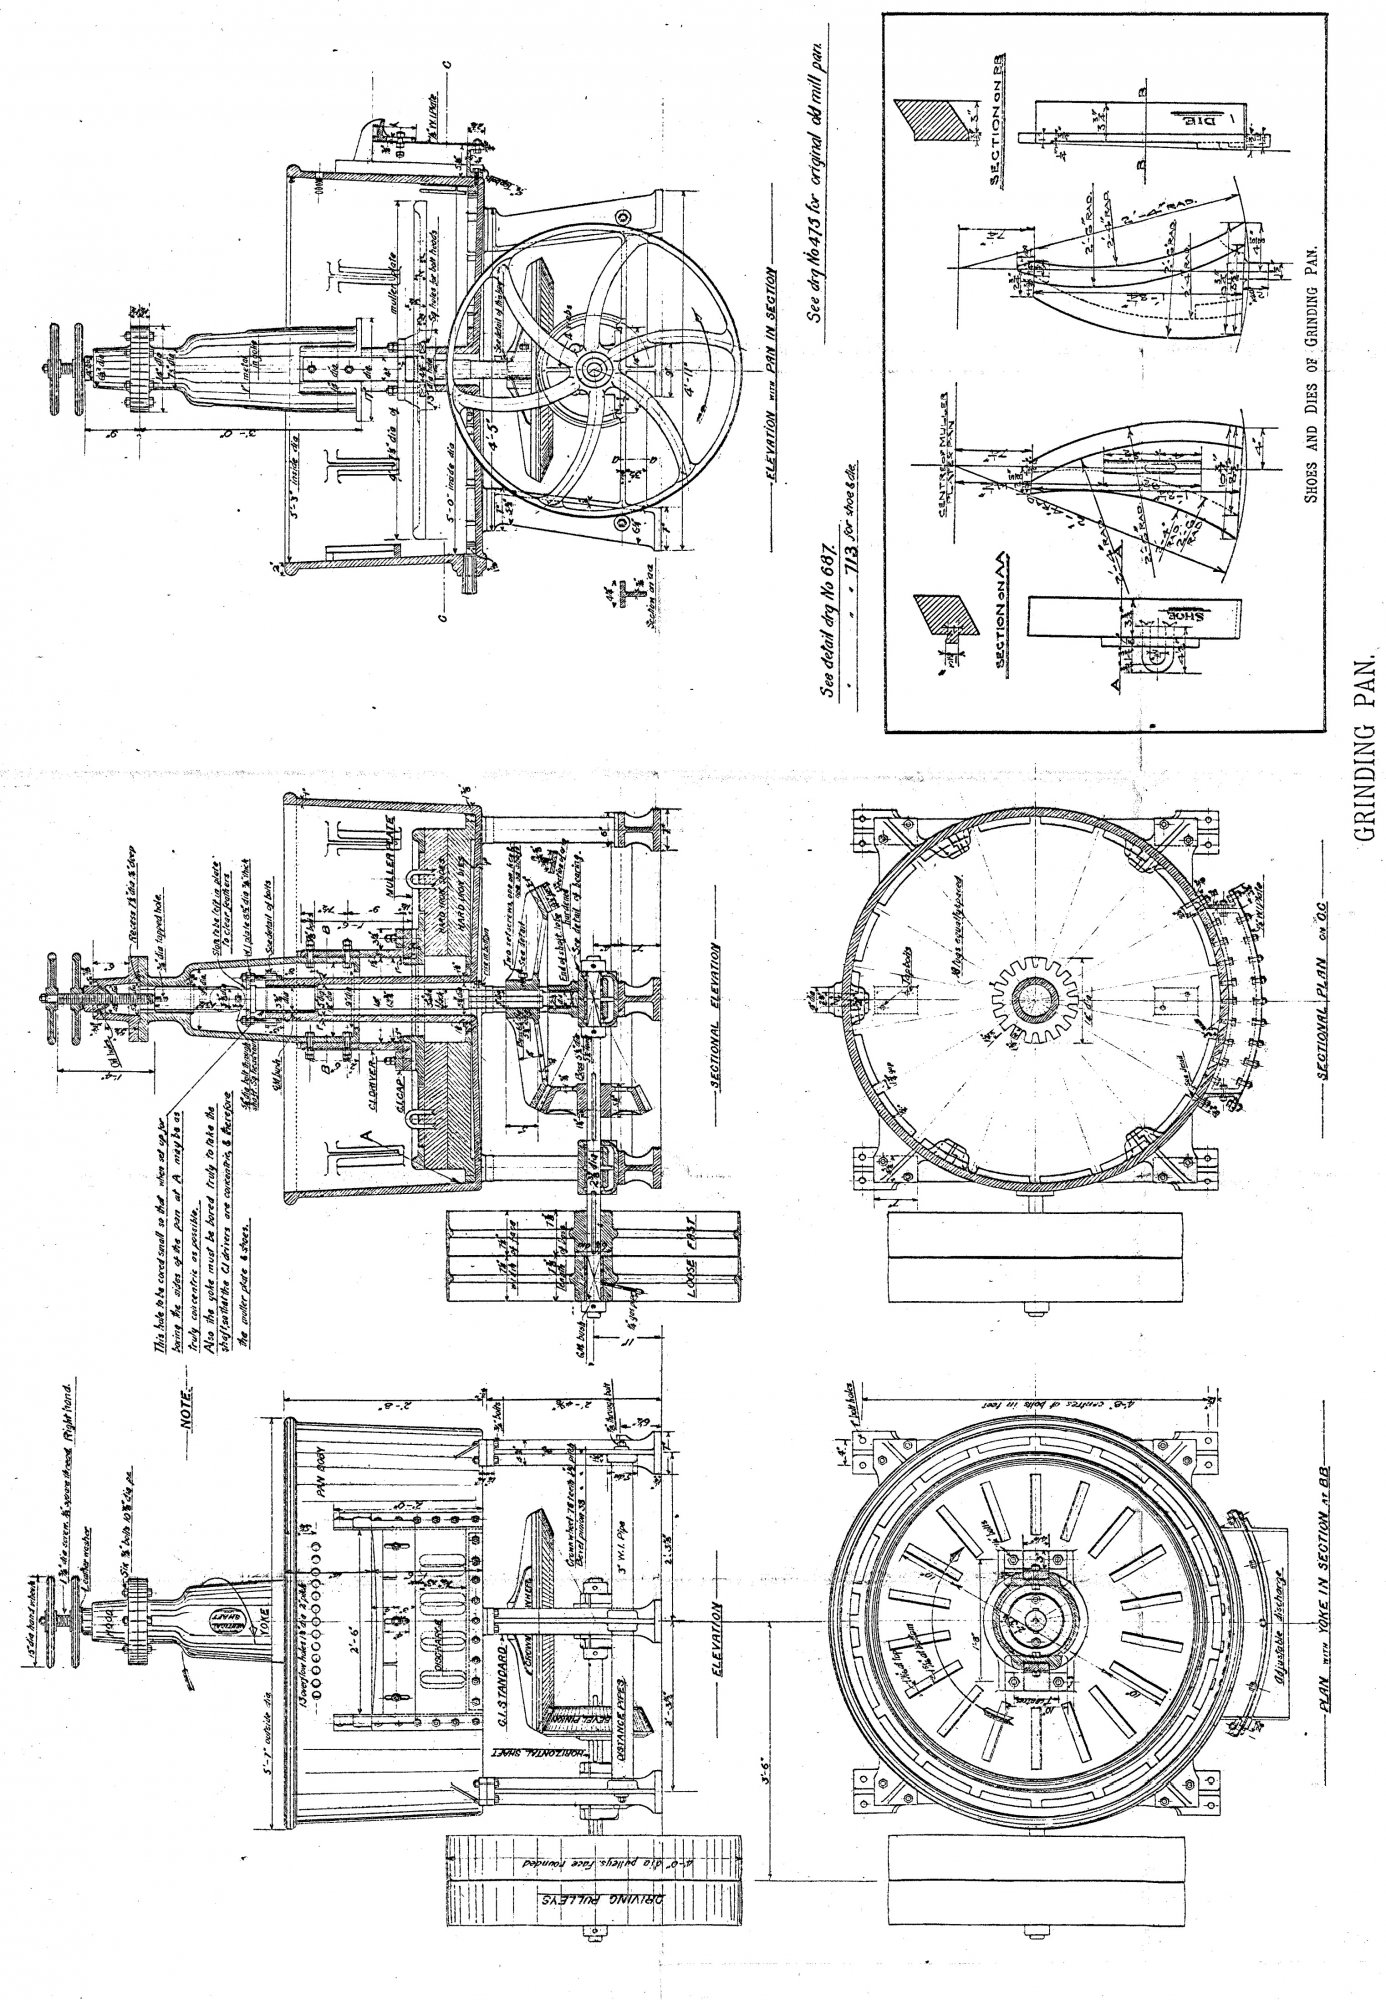 plans of a grinding pan mill drawings